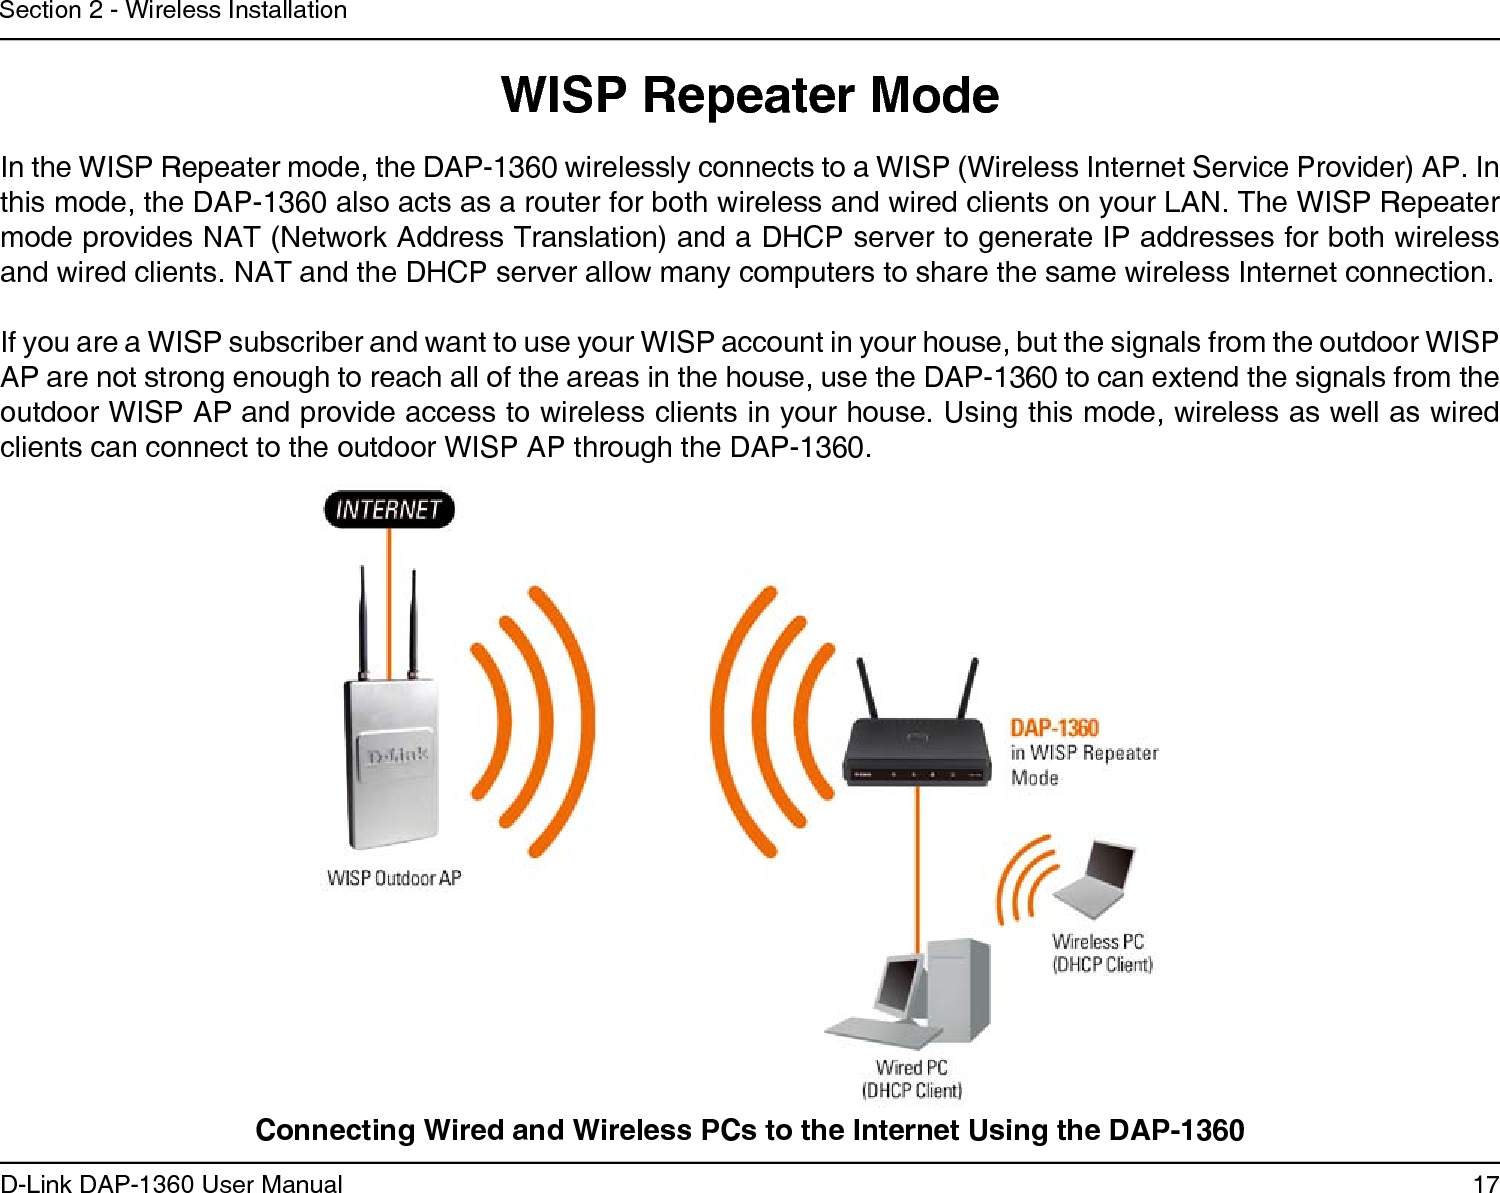 17D-Link DAP-1360 User ManualSection 2 - Wireless InstallationWISP Repeater Mode In the WISP Repeater mode, the DAP-1360 wirelessly connects to a WISP (Wireless Internet Service Provider) AP. In this mode, the DAP-1360 also acts as a router for both wireless and wired clients on your LAN. The WISP Repeater mode provides NAT (Network Address Translation) and a DHCP server to generate IP addresses for both wireless and wired clients. NAT and the DHCP server allow many computers to share the same wireless Internet connection.If you are a WISP subscriber and want to use your WISP account in your house, but the signals from the outdoor WISP AP are not strong enough to reach all of the areas in the house, use the DAP-1360 to can extend the signals from the outdoor WISP AP and provide access to wireless clients in your house. Using this mode, wireless as well as wired clients can connect to the outdoor WISP AP through the DAP-1360.Connecting Wired and Wireless PCs to the Internet Using the DAP-1360